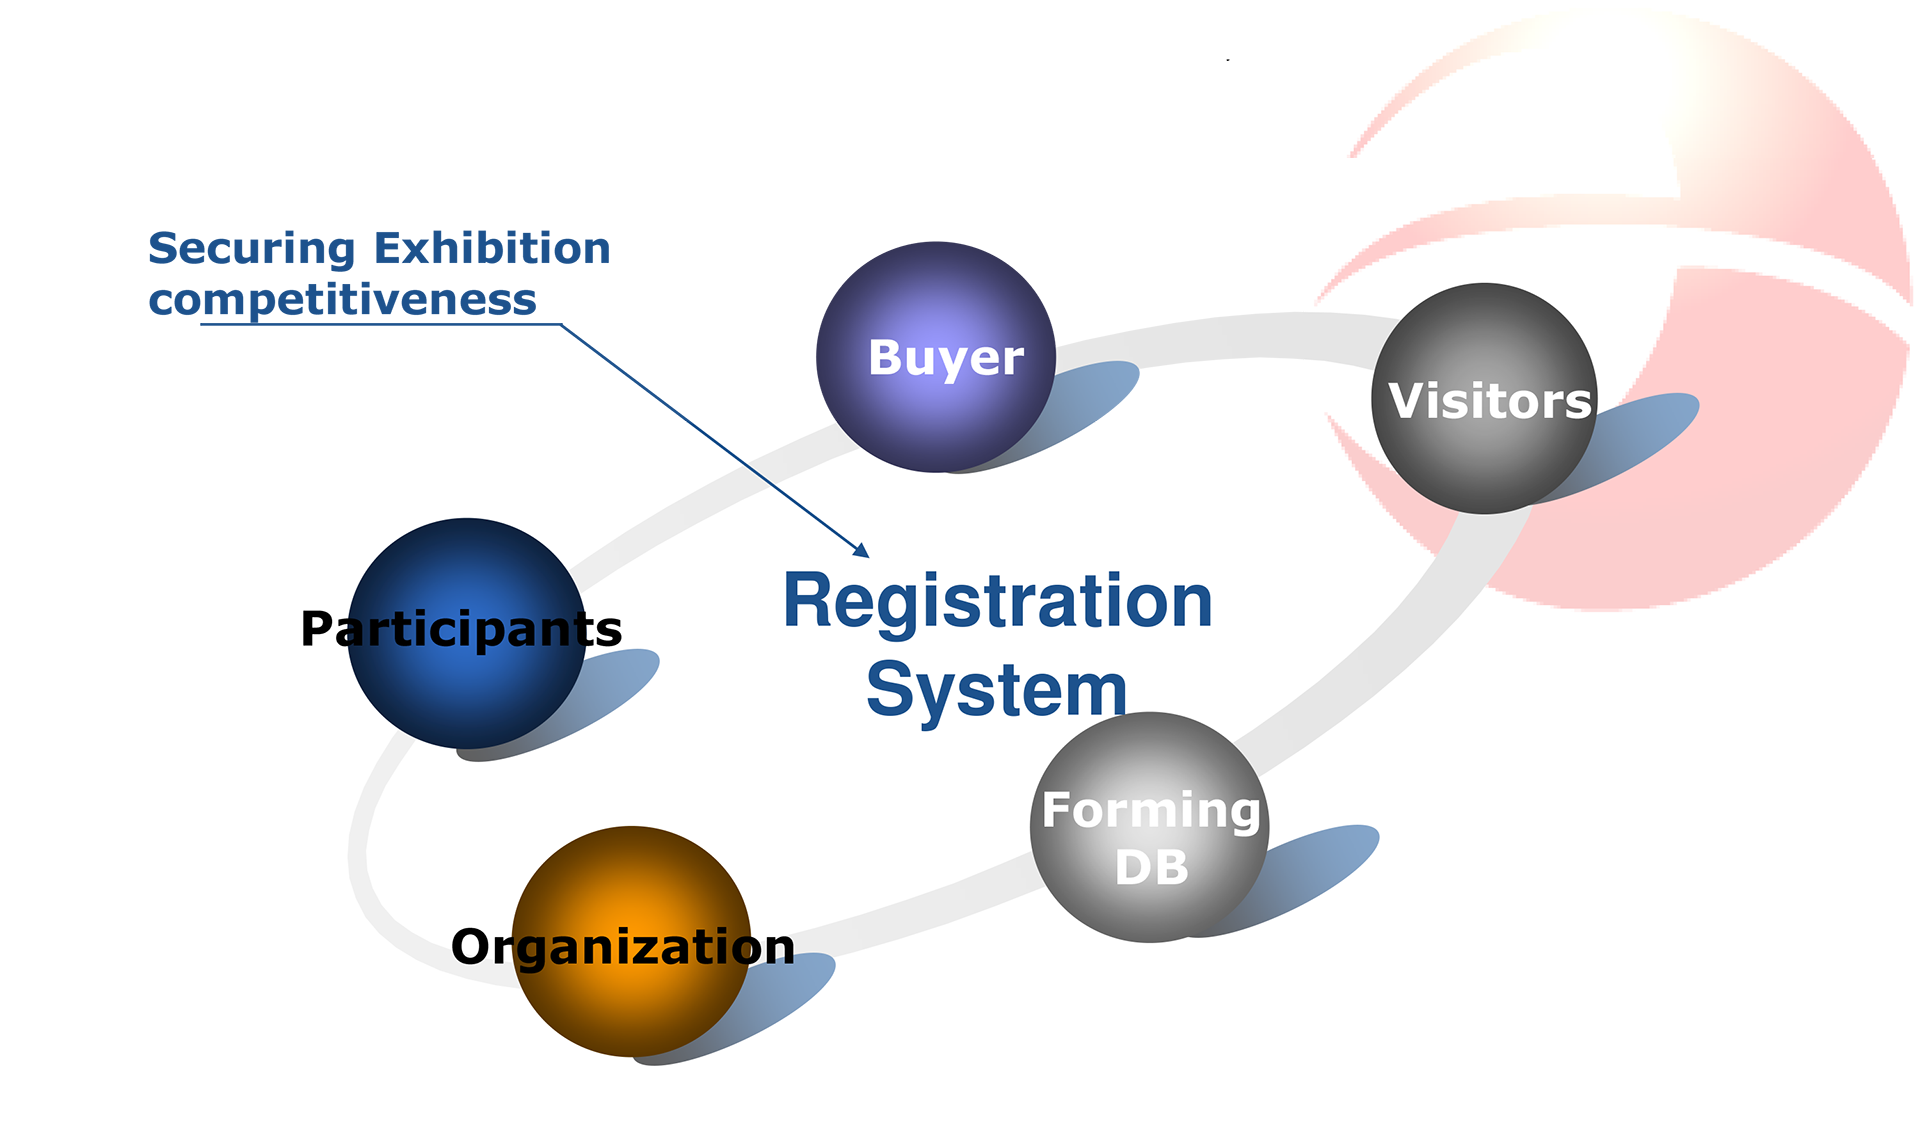 EIMS Vietnam - Registration system, linking the relationship of Exhibition